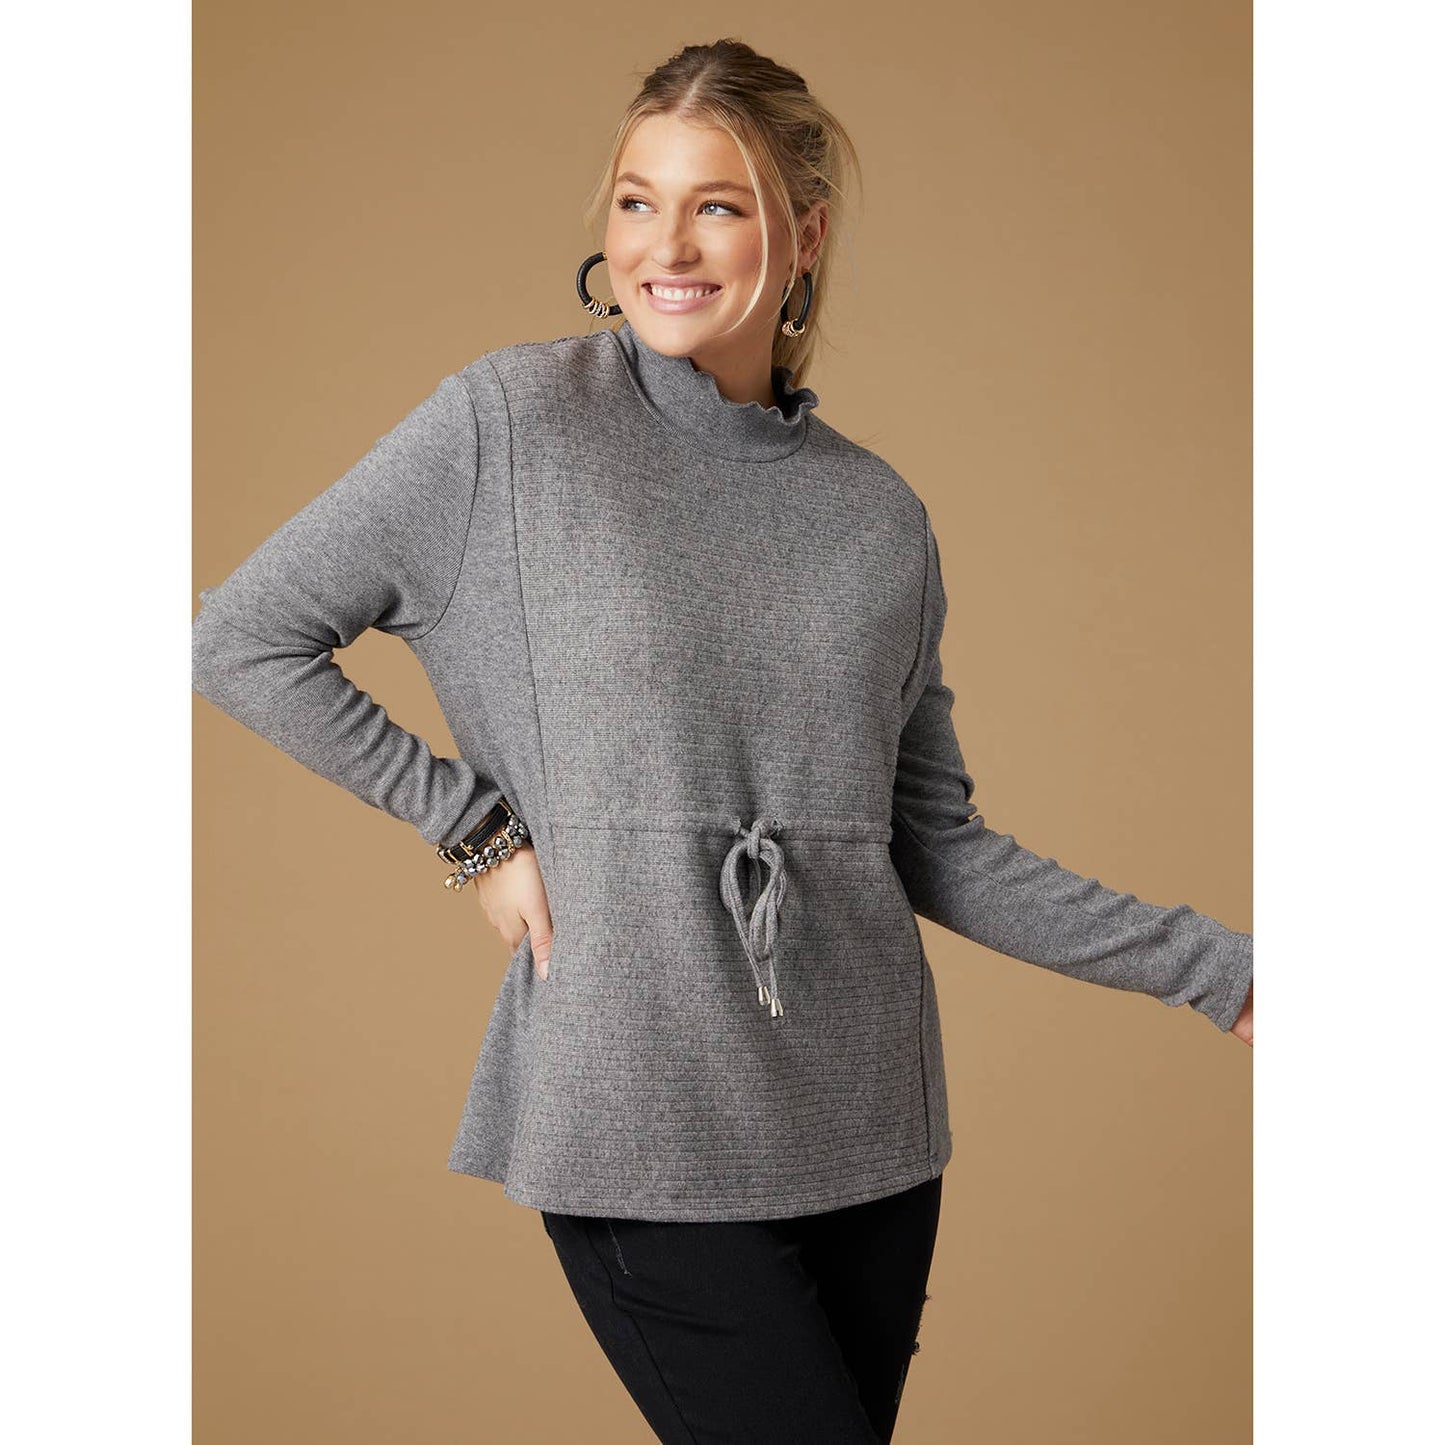 Charity Knit Top with Drawstring Waist: L/XL / Mid Heather Grey